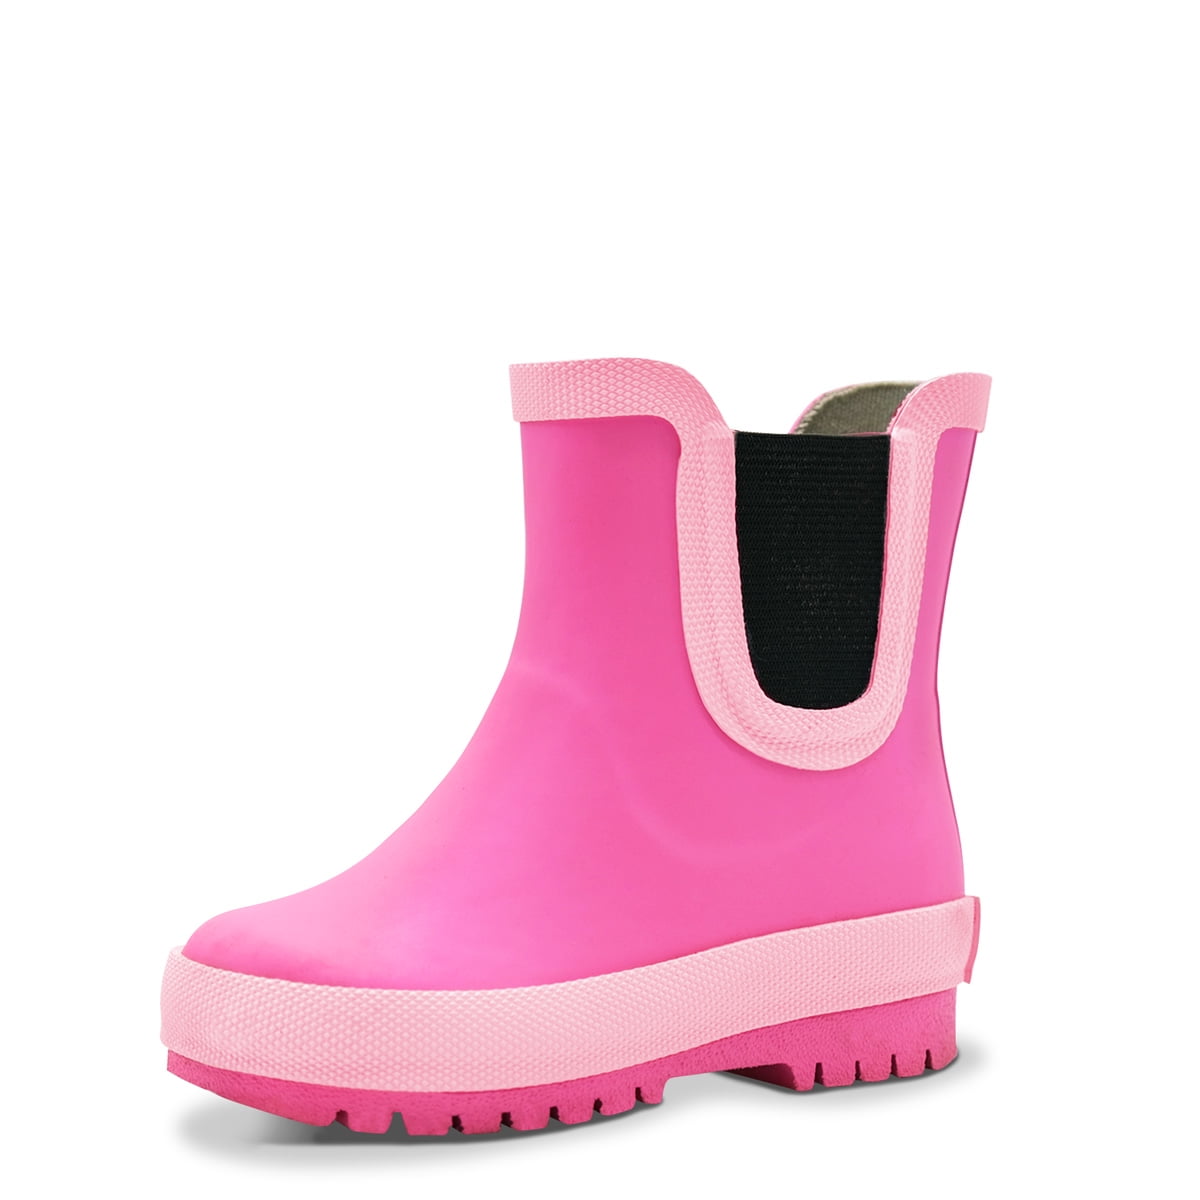 Buy > infant size 5 rain boots > in stock